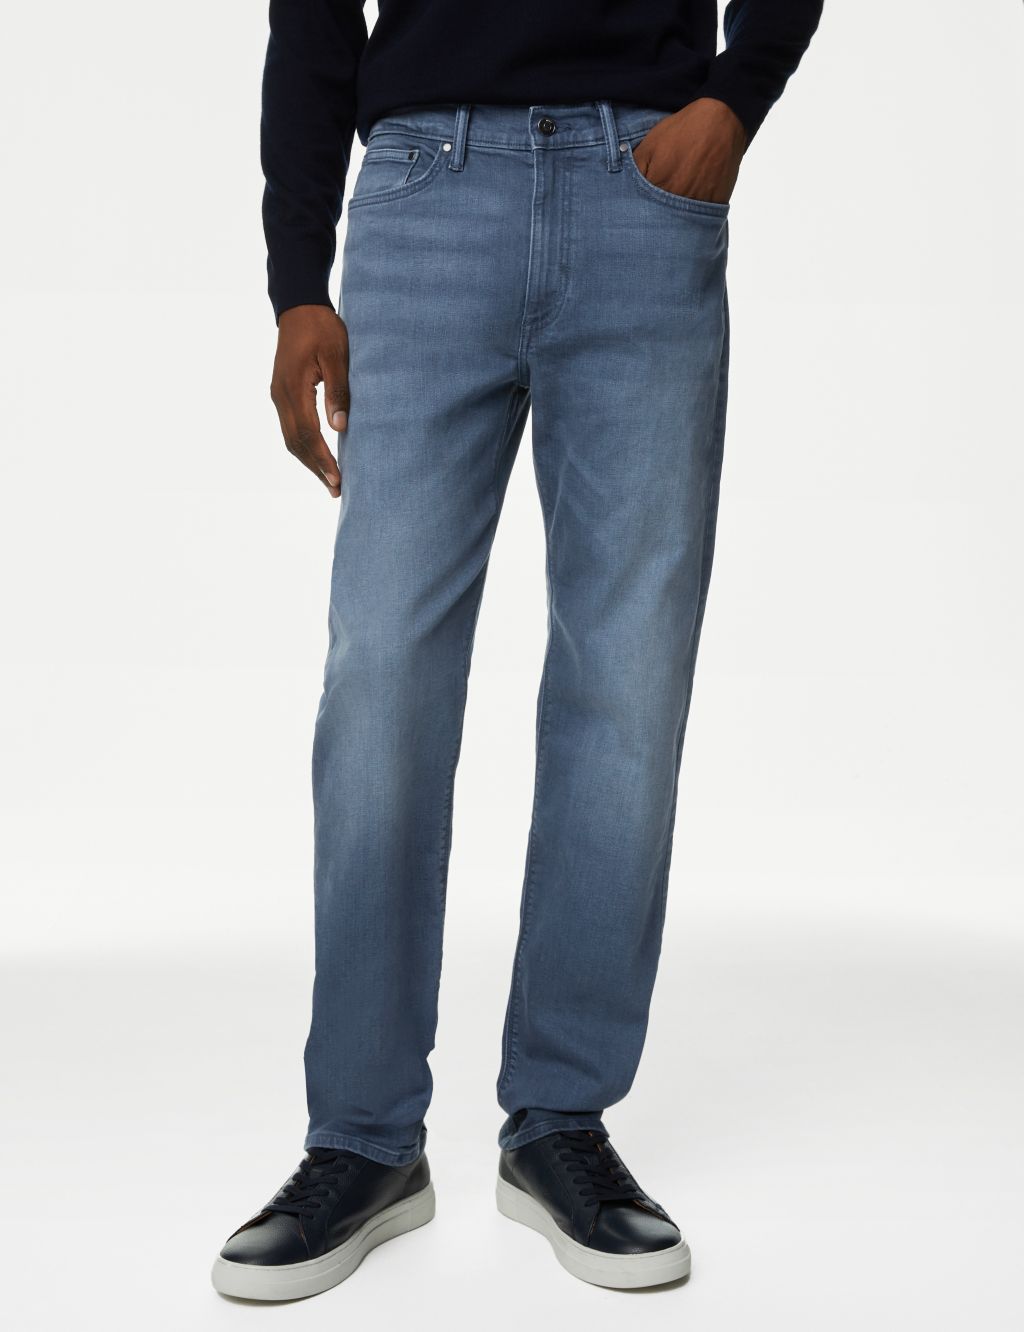 Straight Fit Stretch Jeans image 1